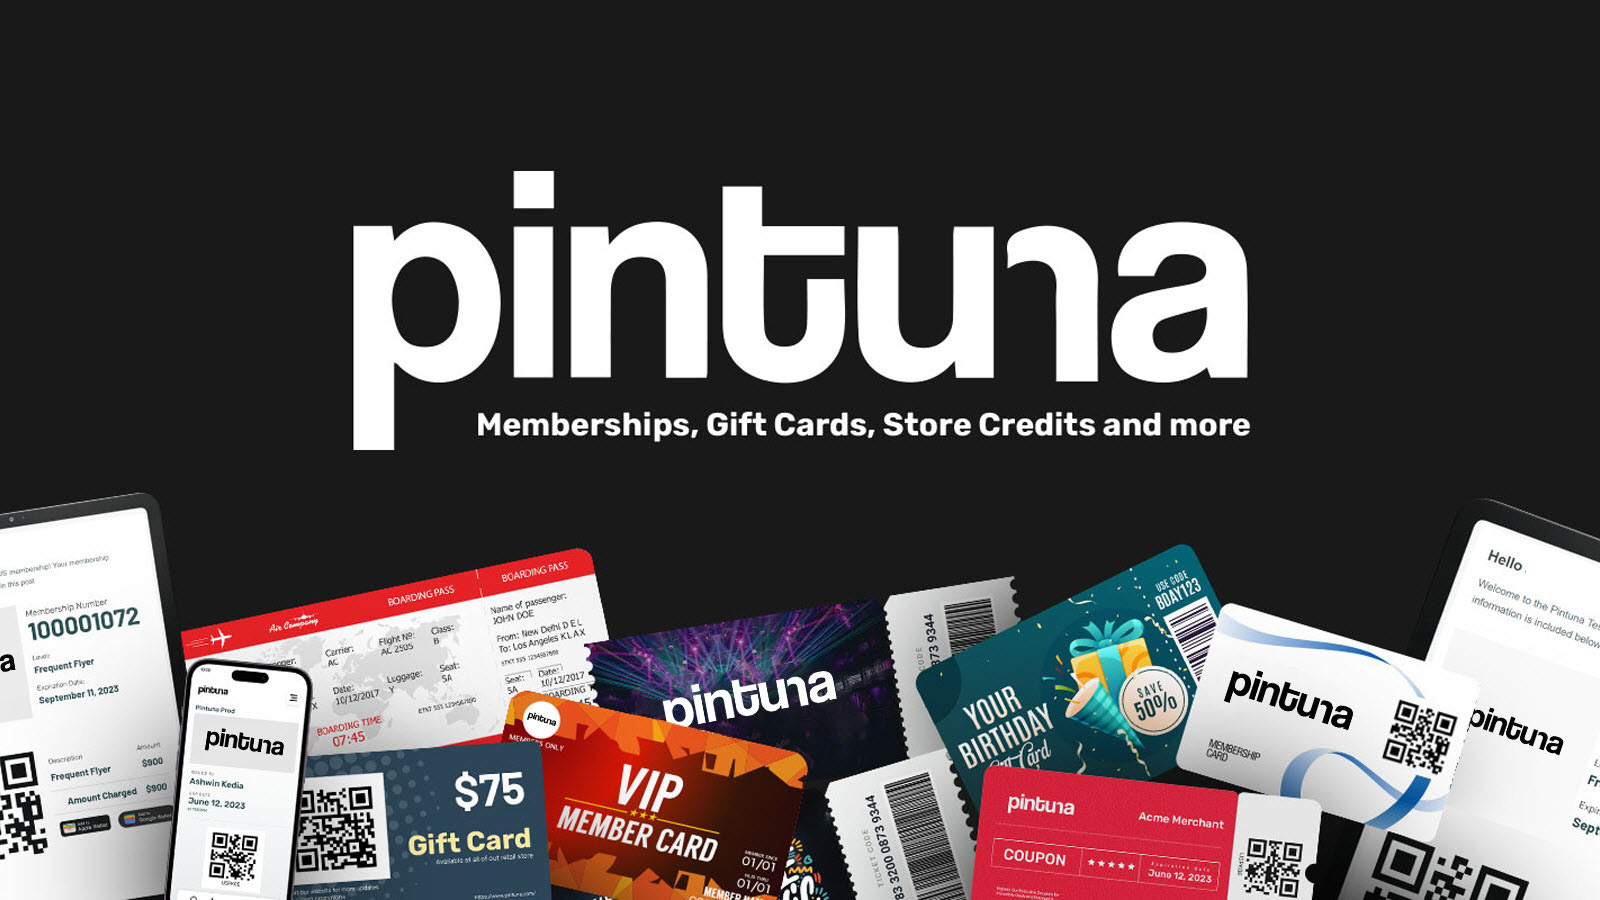 One app for Gift Cards, Store Credits and Loyalty